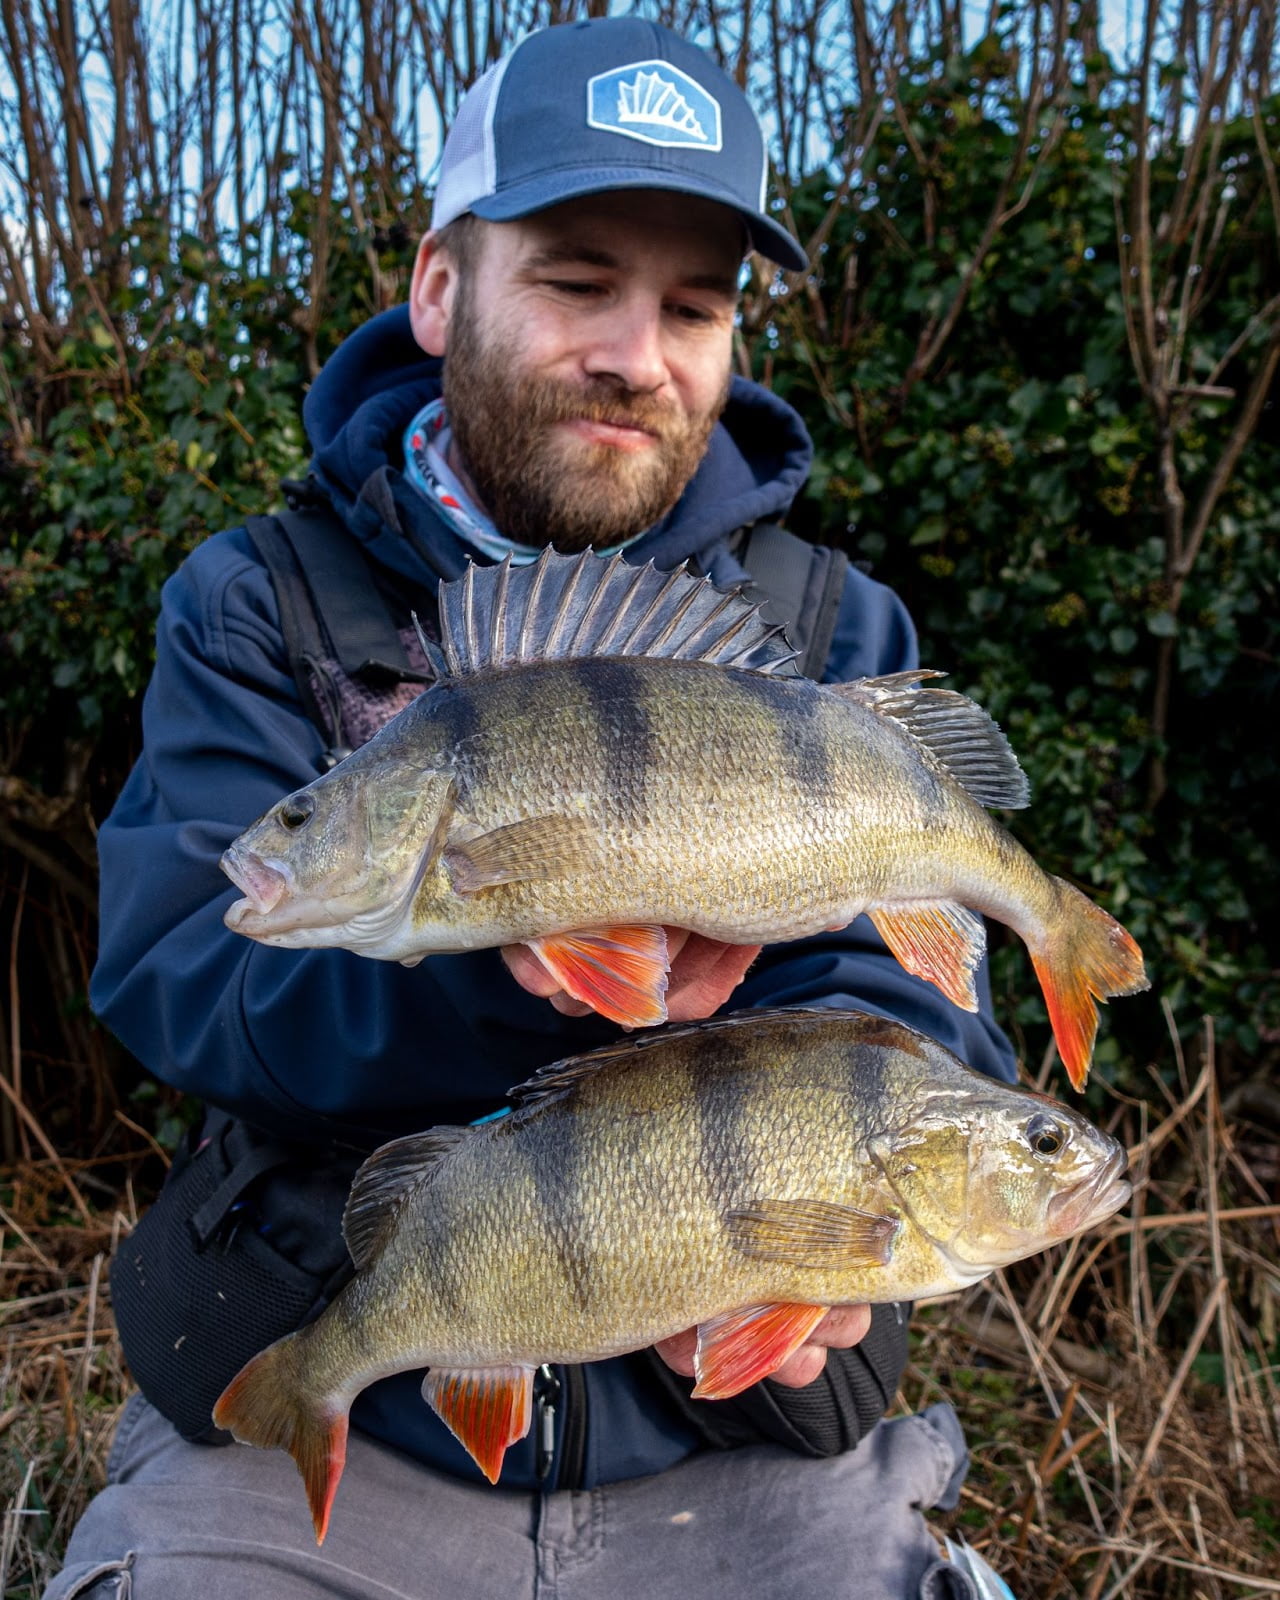 Get on the Ned rig for big perch